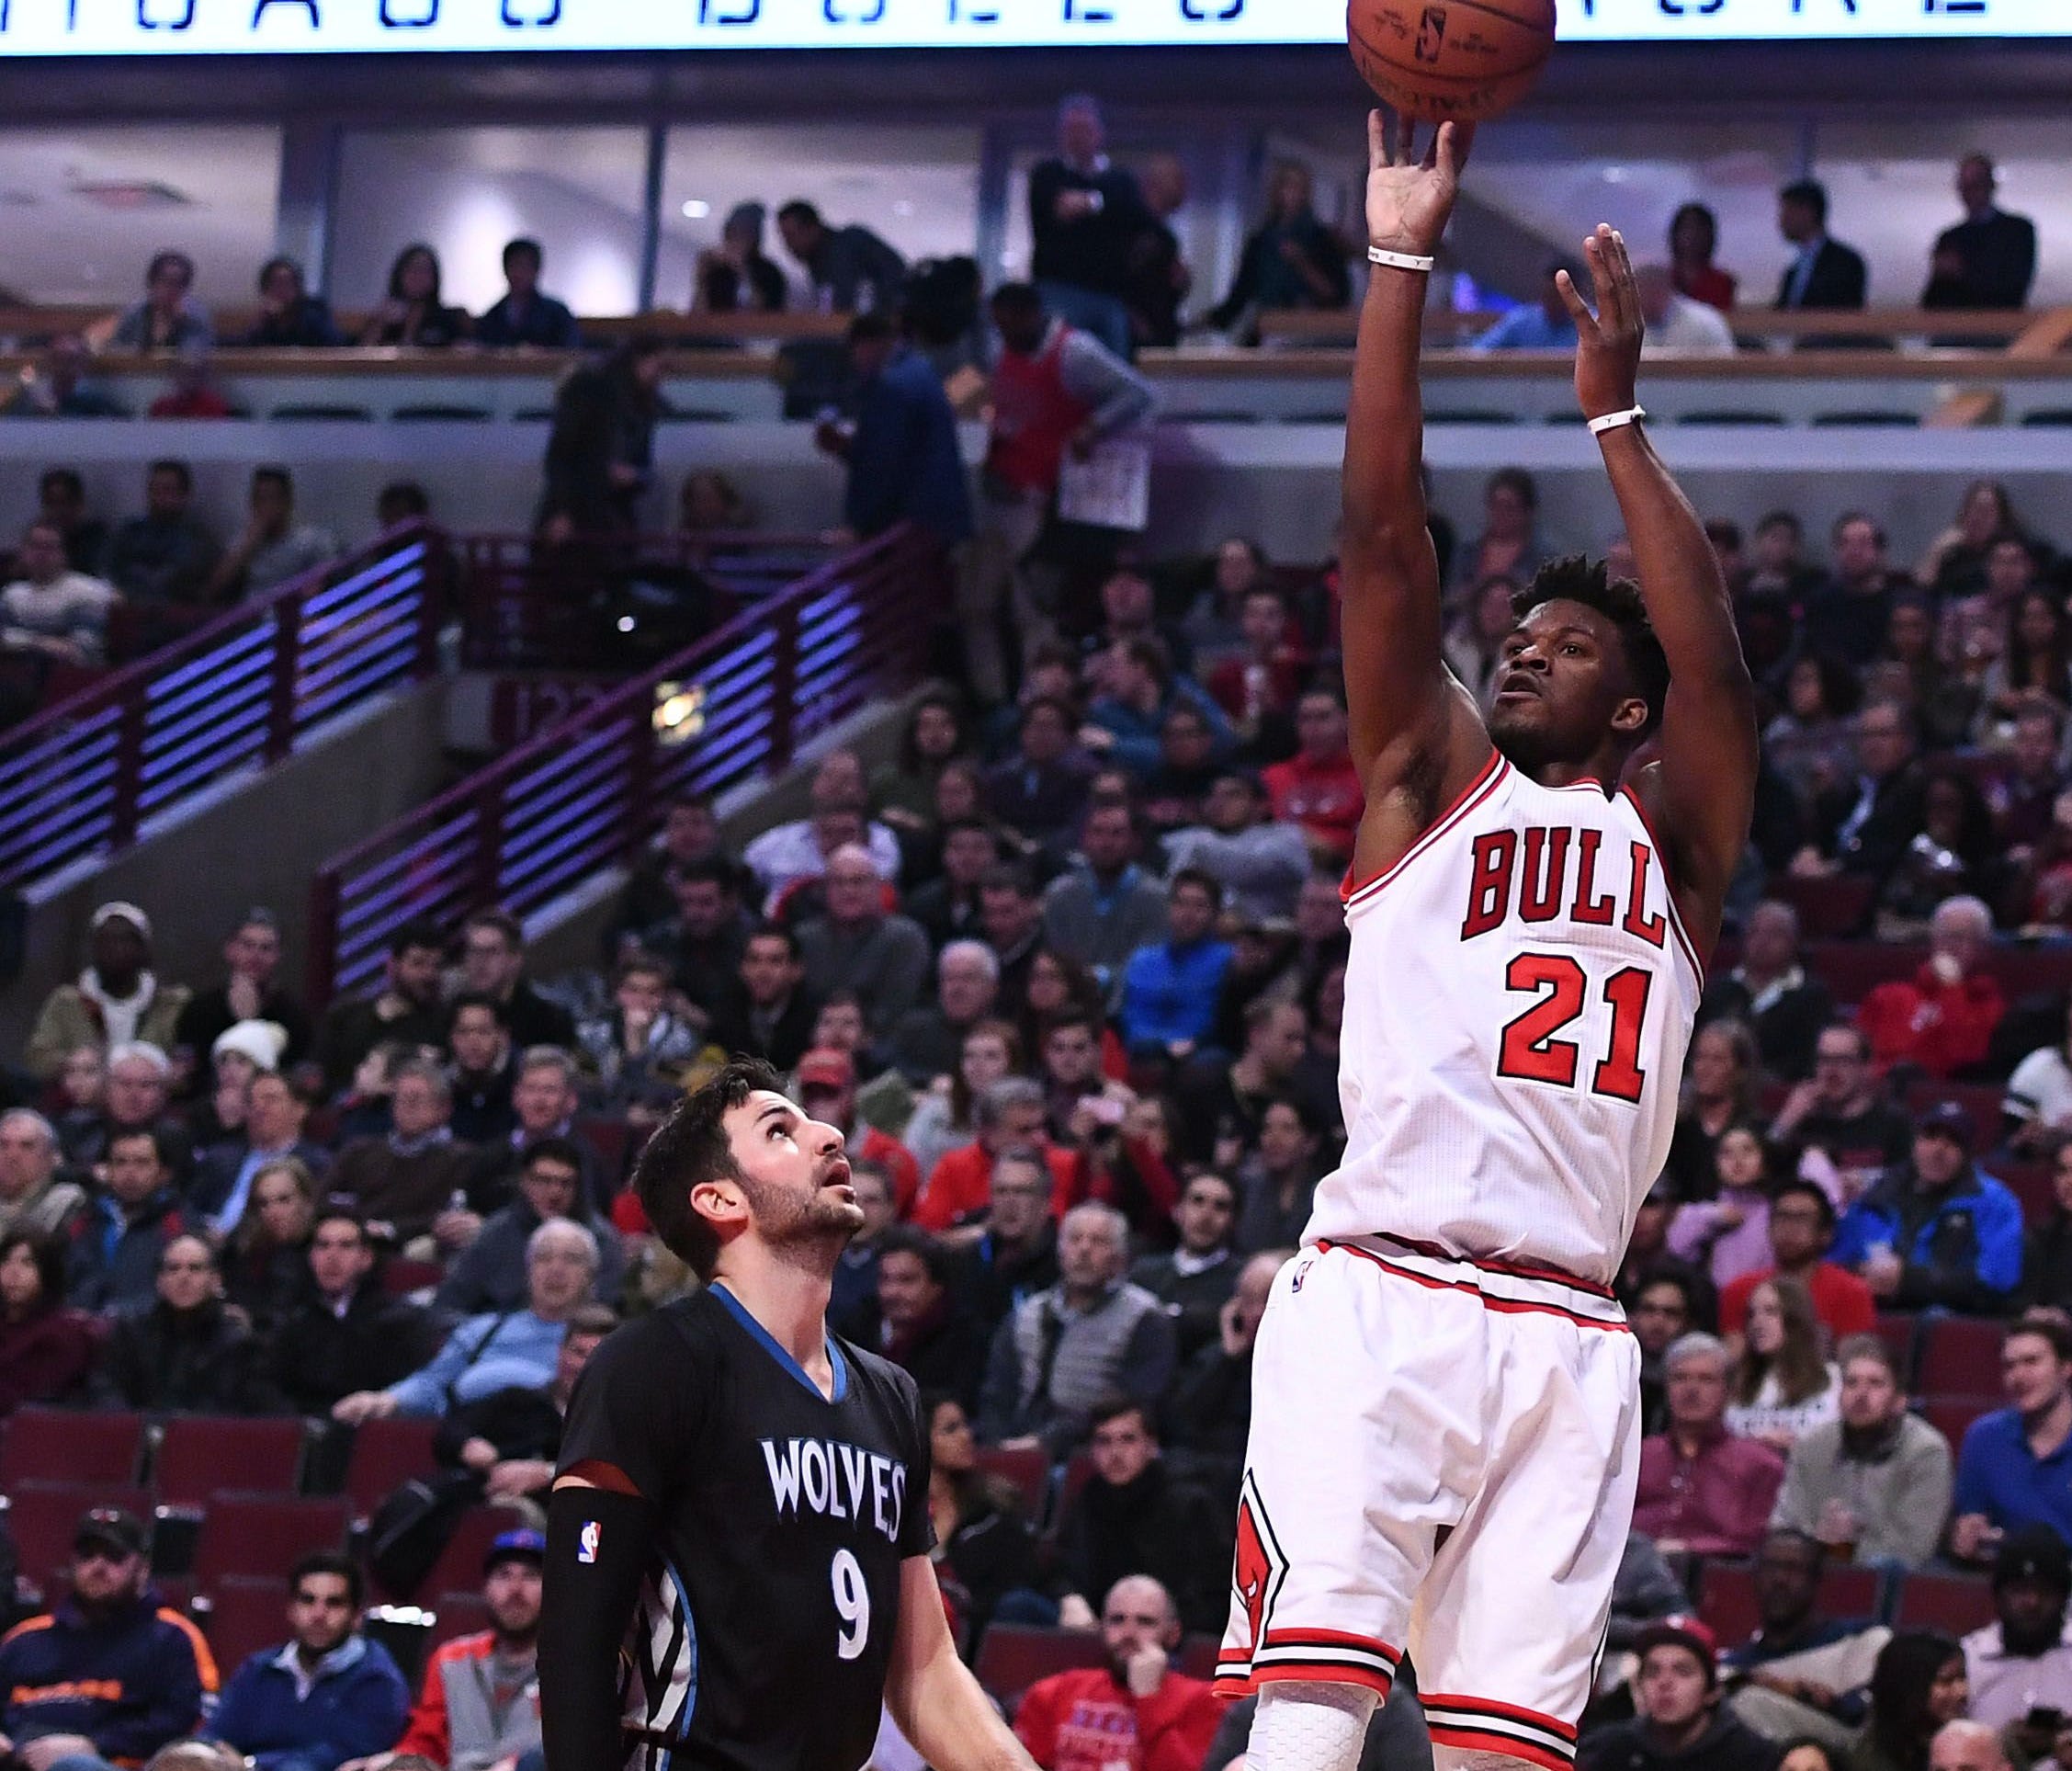 Chicago Bulls forward Jimmy Butler (21) shoots the ball against Minnesota Timberwolves guard Ricky Rubio (9) during the first half at the United Center.